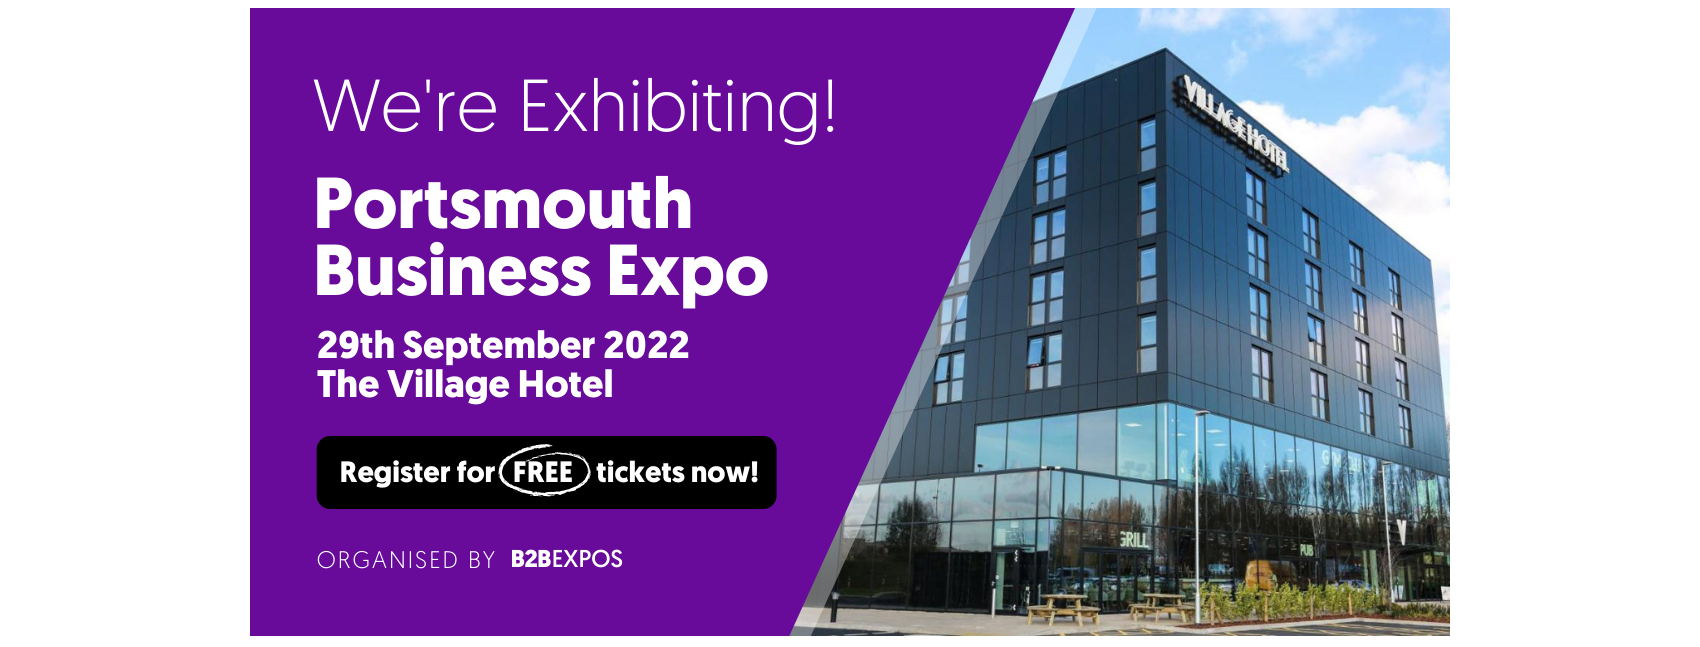 Join edtech.direct at the Portsmouth Business Expo